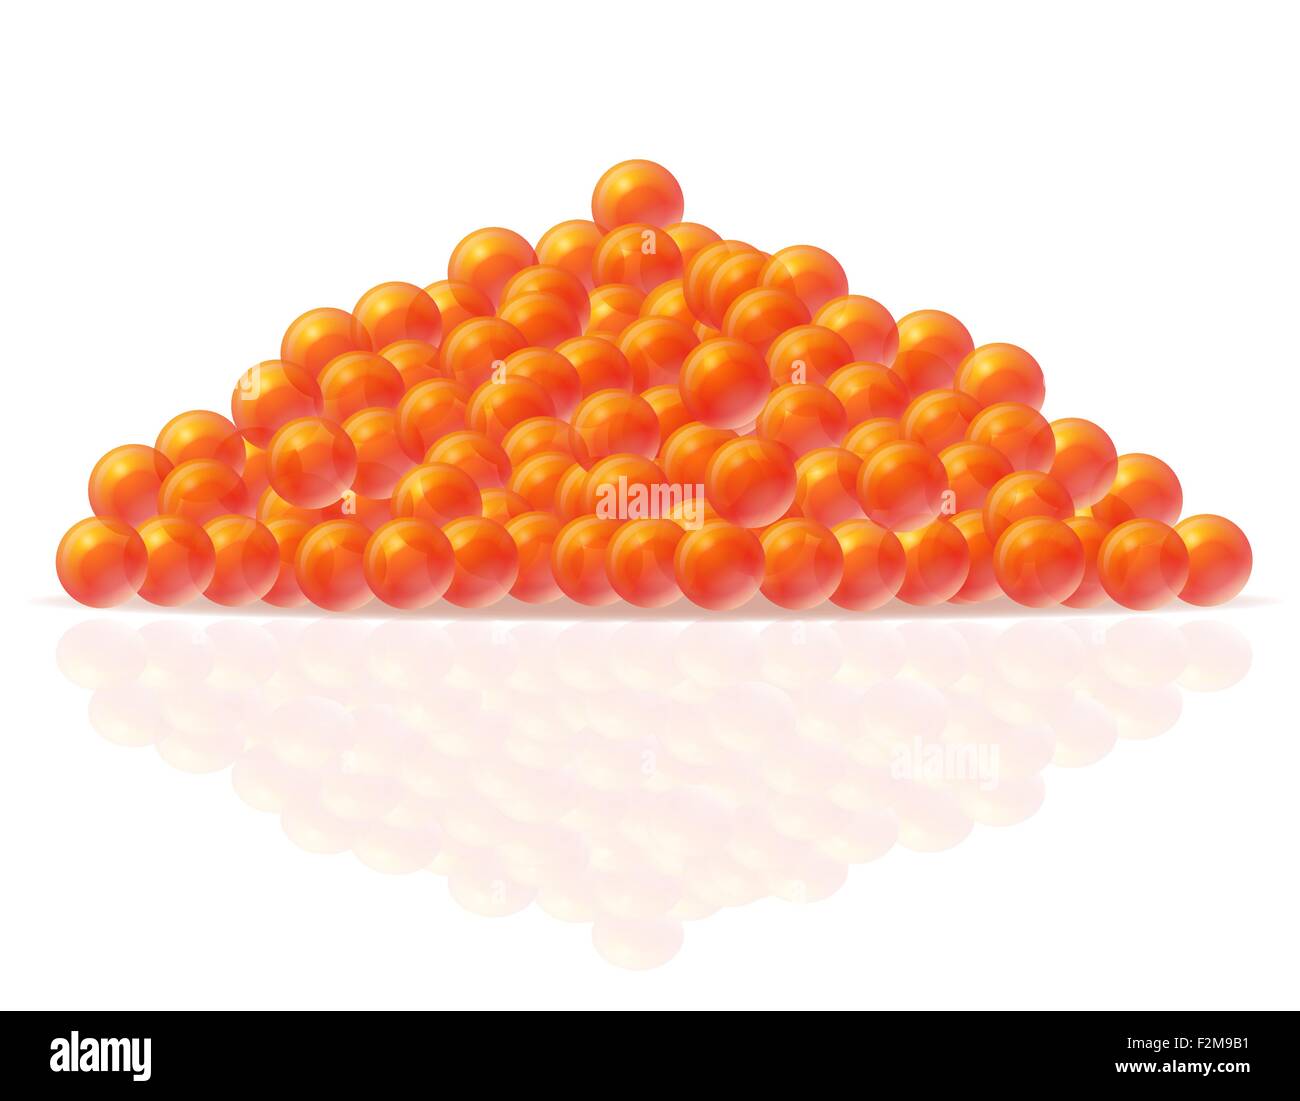 red caviar vector illustration isolated on white background Stock Vector